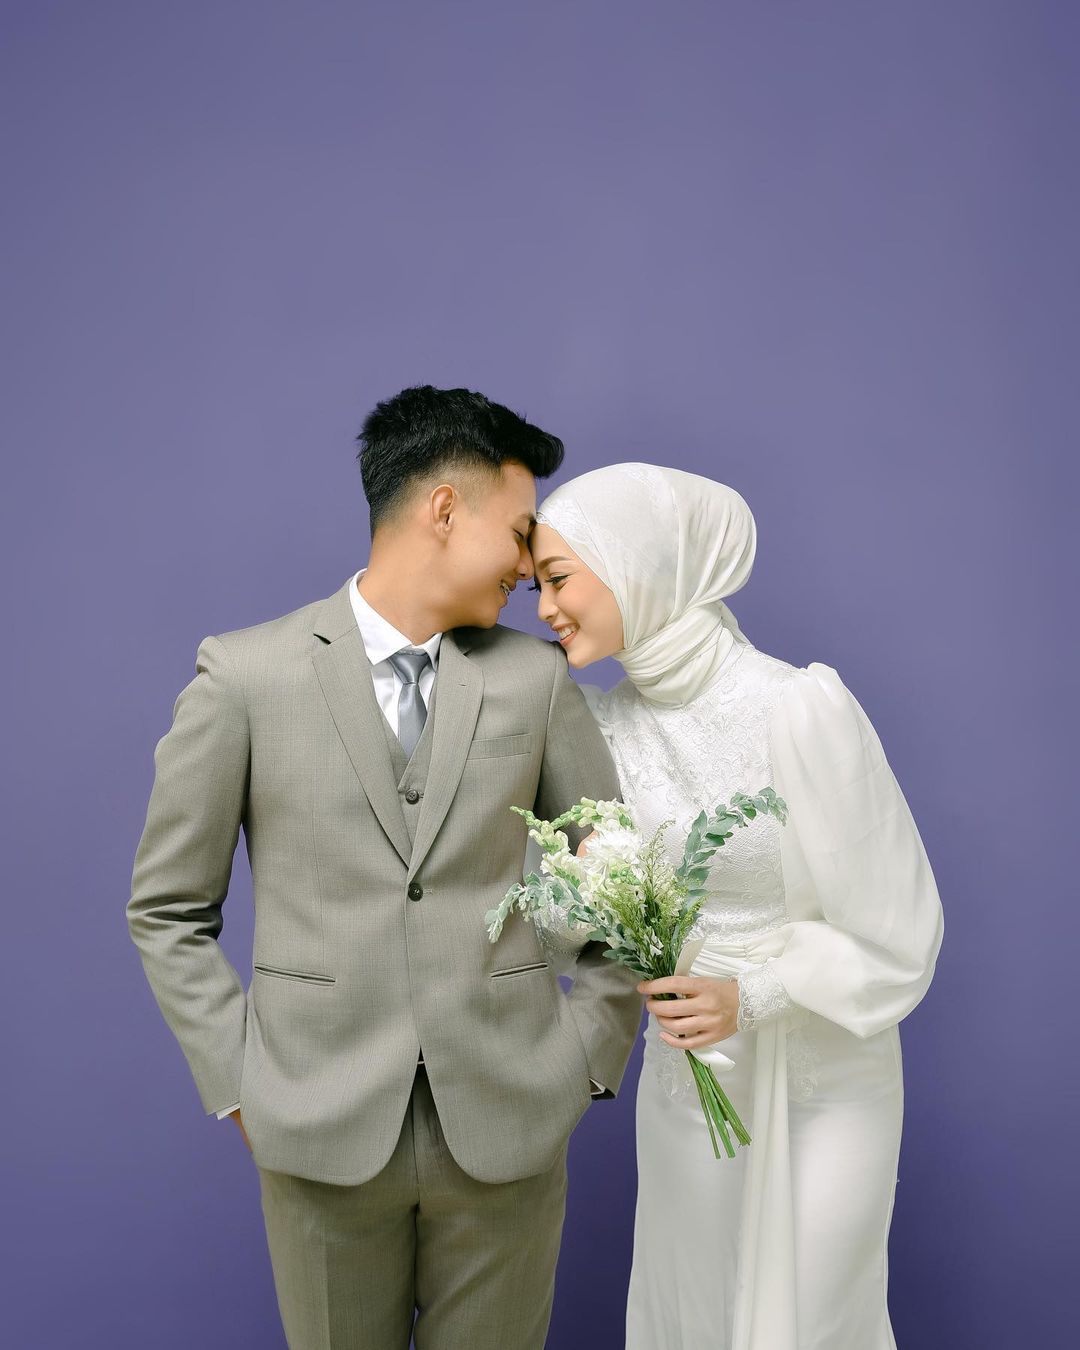 The Most Favorite Hijab Bridal Styles For 2021 Weddings